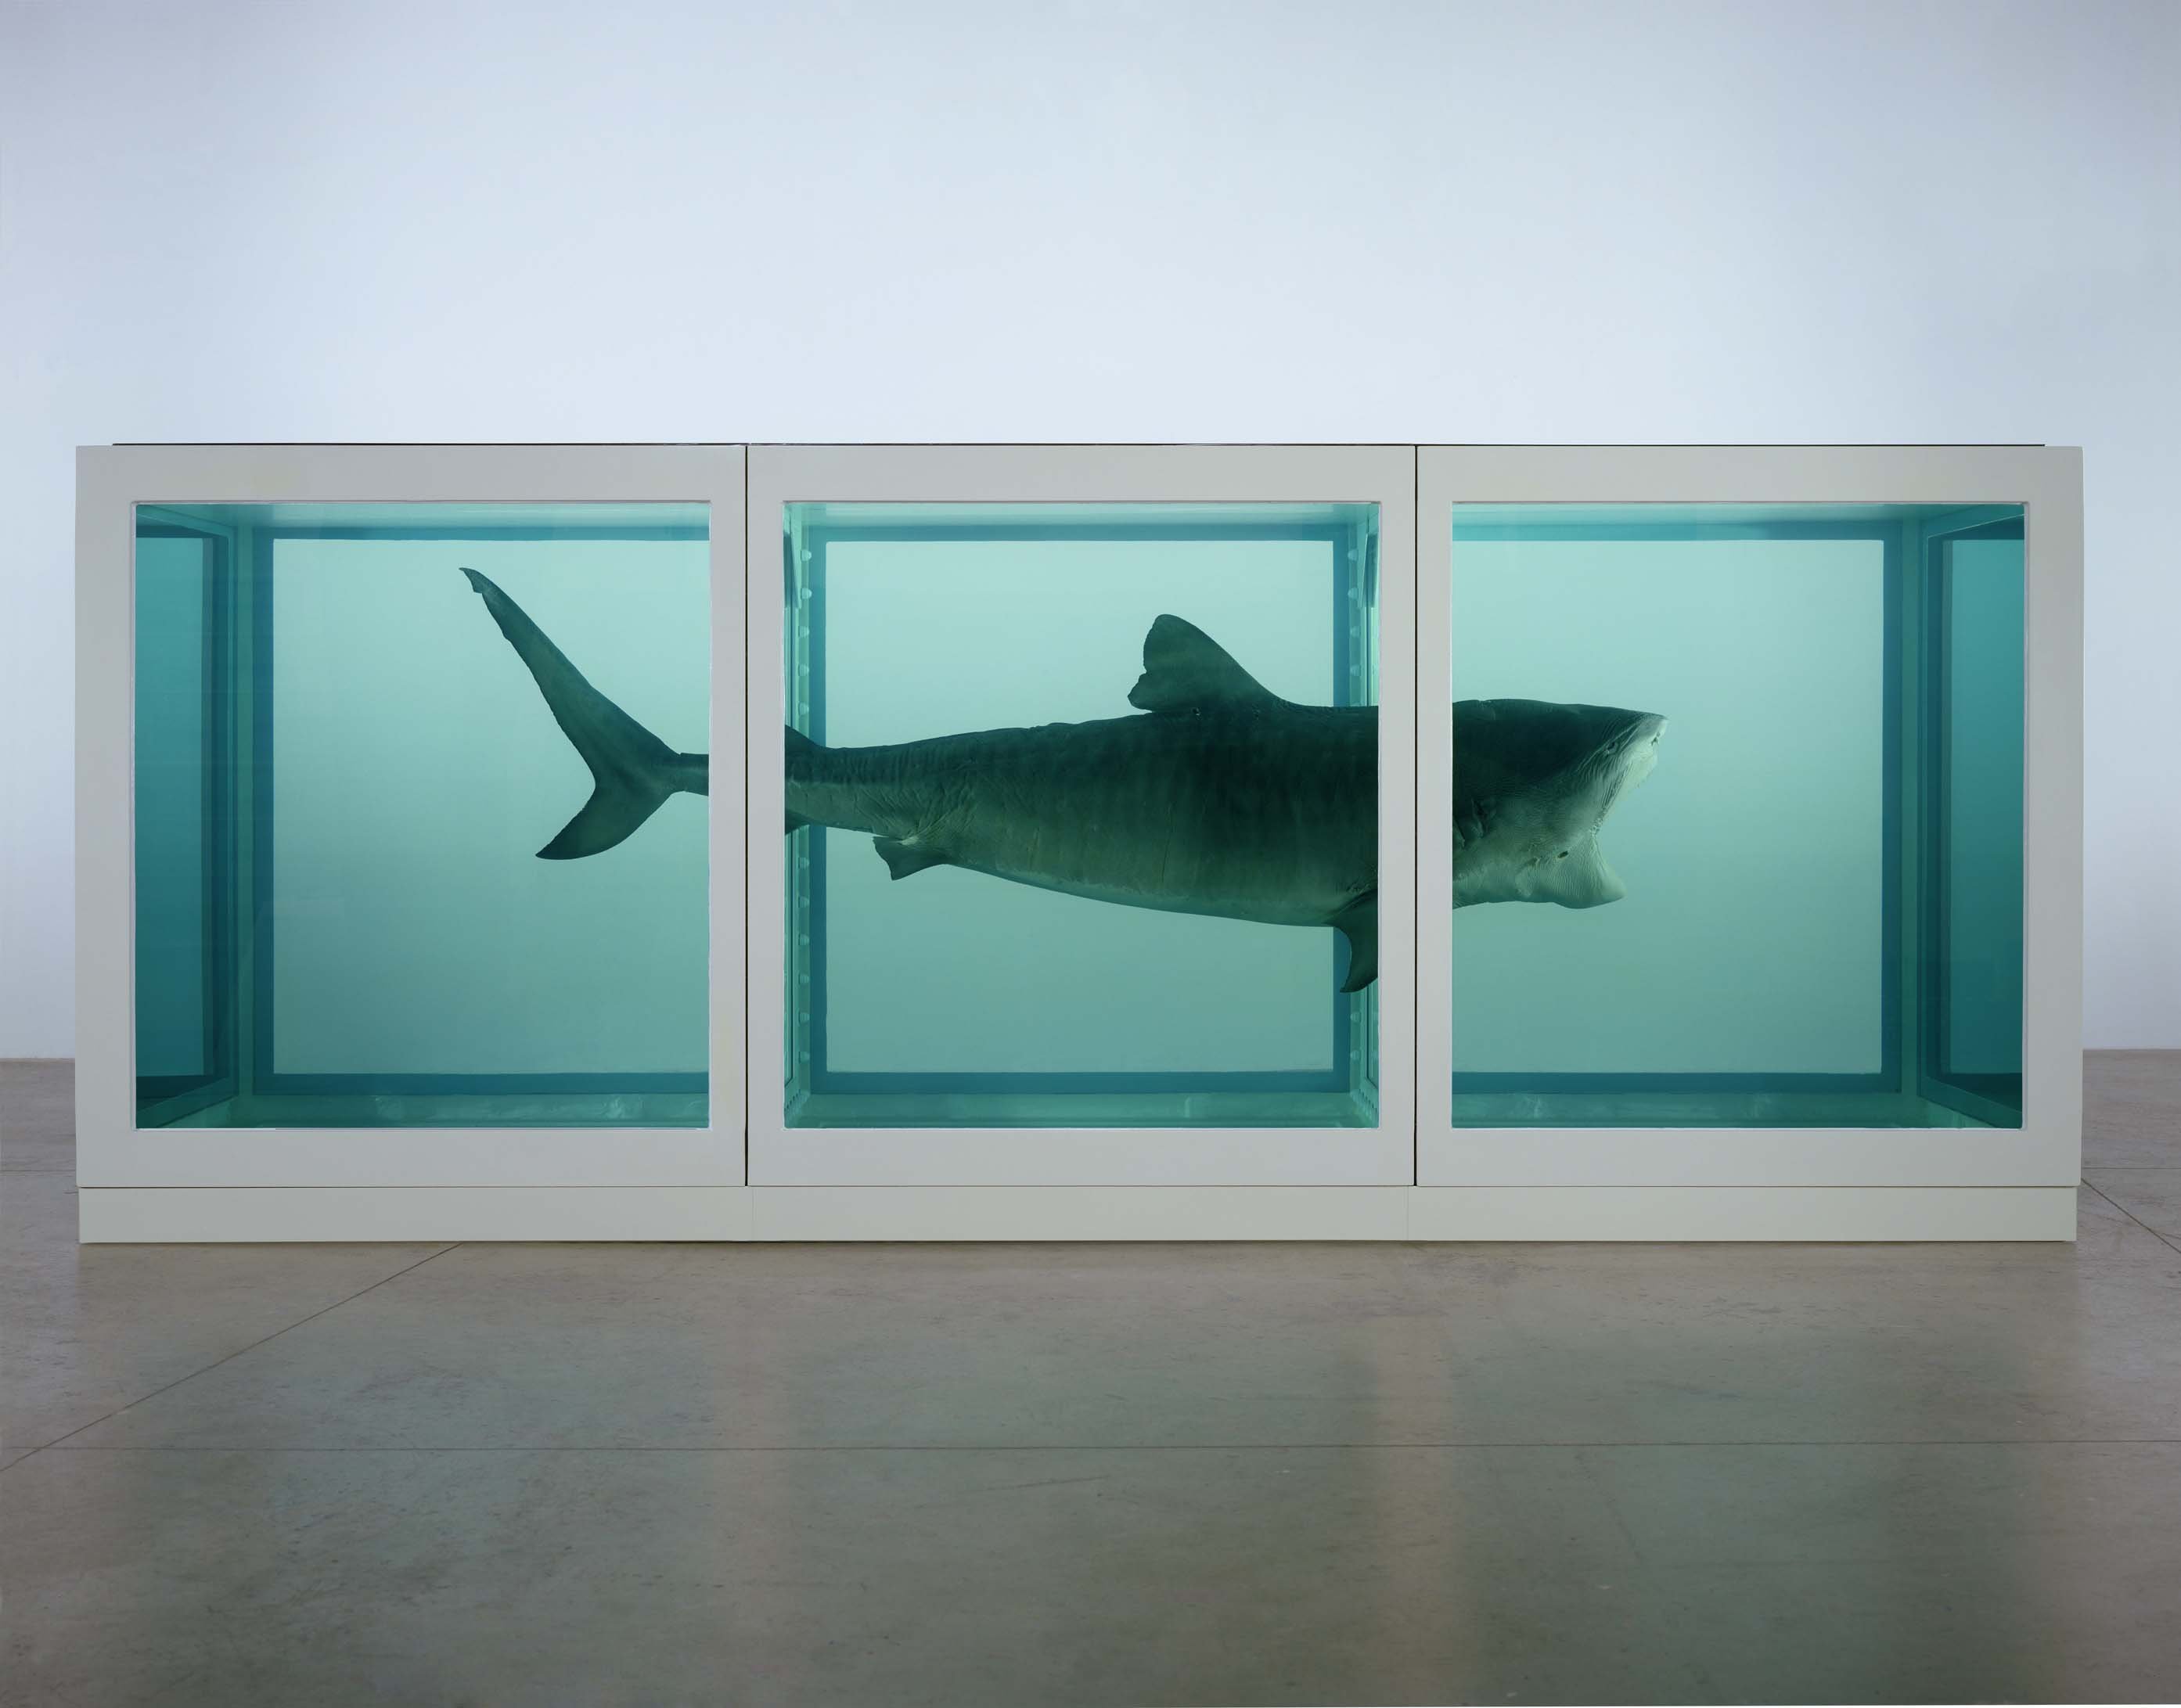 Damien Hirst - The Physical Impossibility of Death in the Mind of Someone Living - 1991